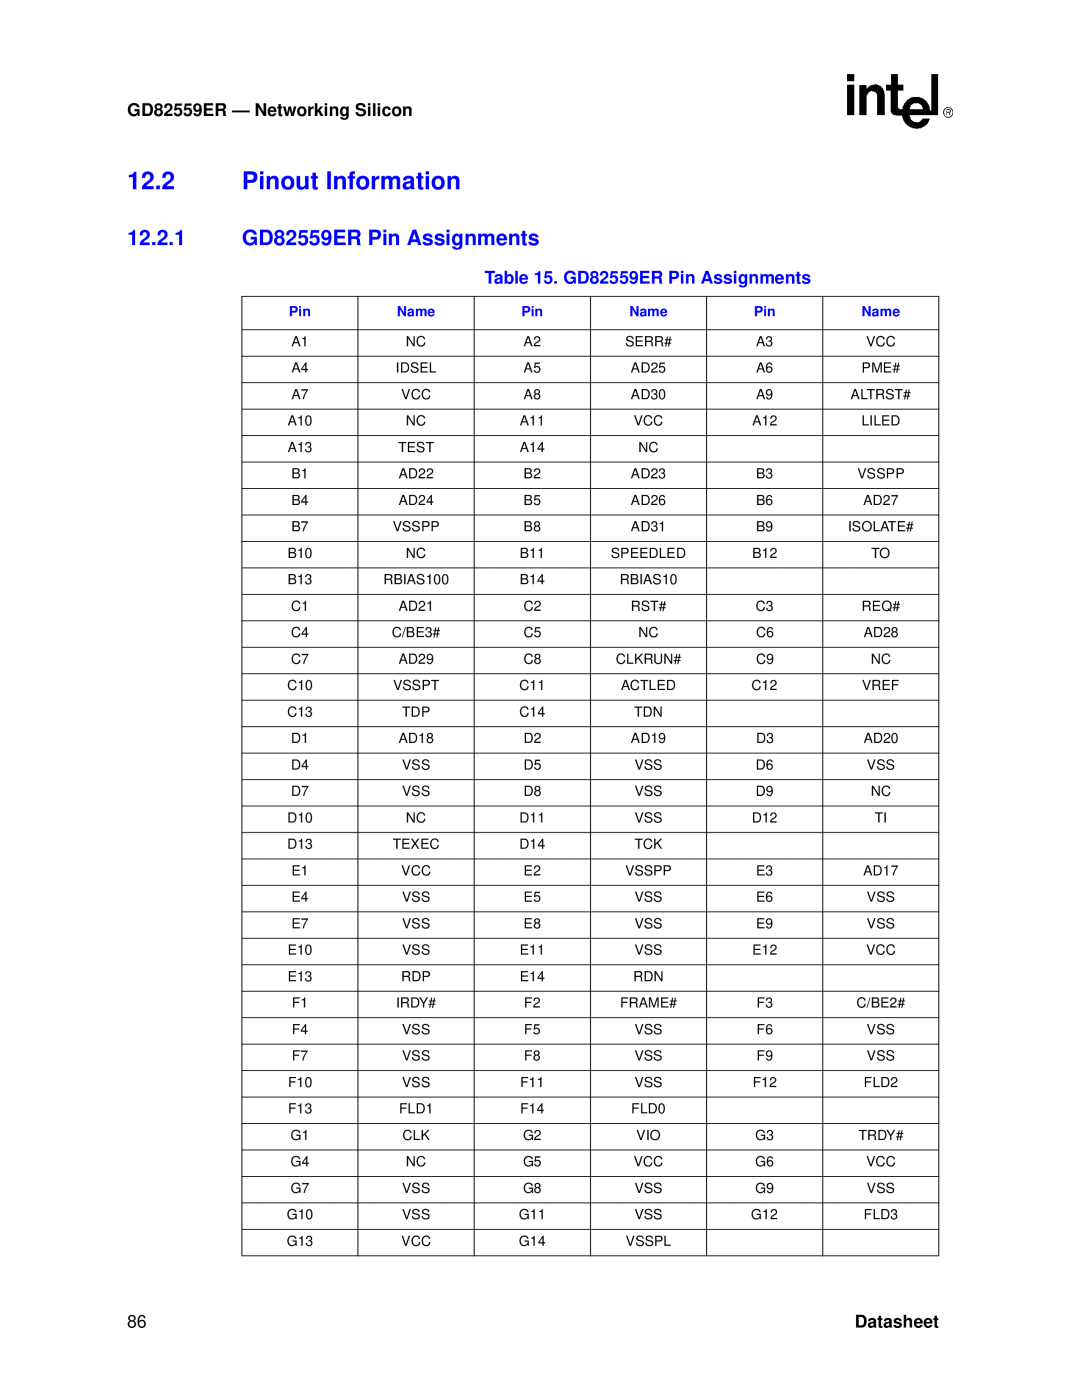 Intel manual Pinout Information, 12.2.1 GD82559ER Pin Assignments, GD82559ER - Networking Silicon, Datasheet 